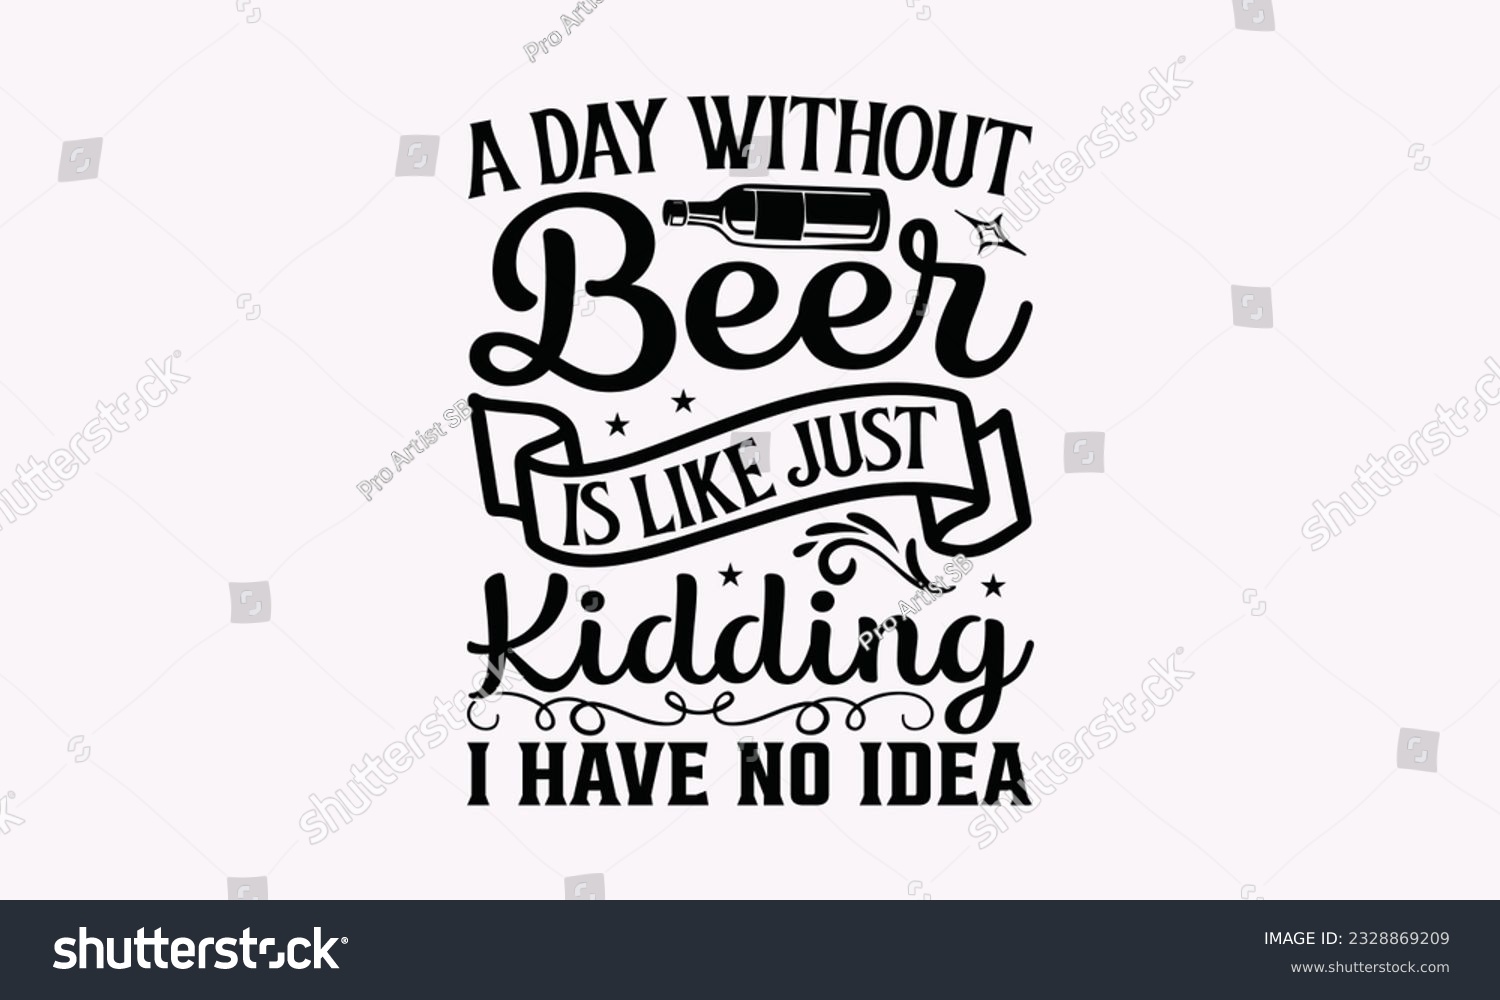 SVG of A Day without Beer Is Like Just Kidding I Have No Idea - Alcohol SVG Design, Cheer Quotes, Hand drawn lettering phrase, Isolated on white background. svg